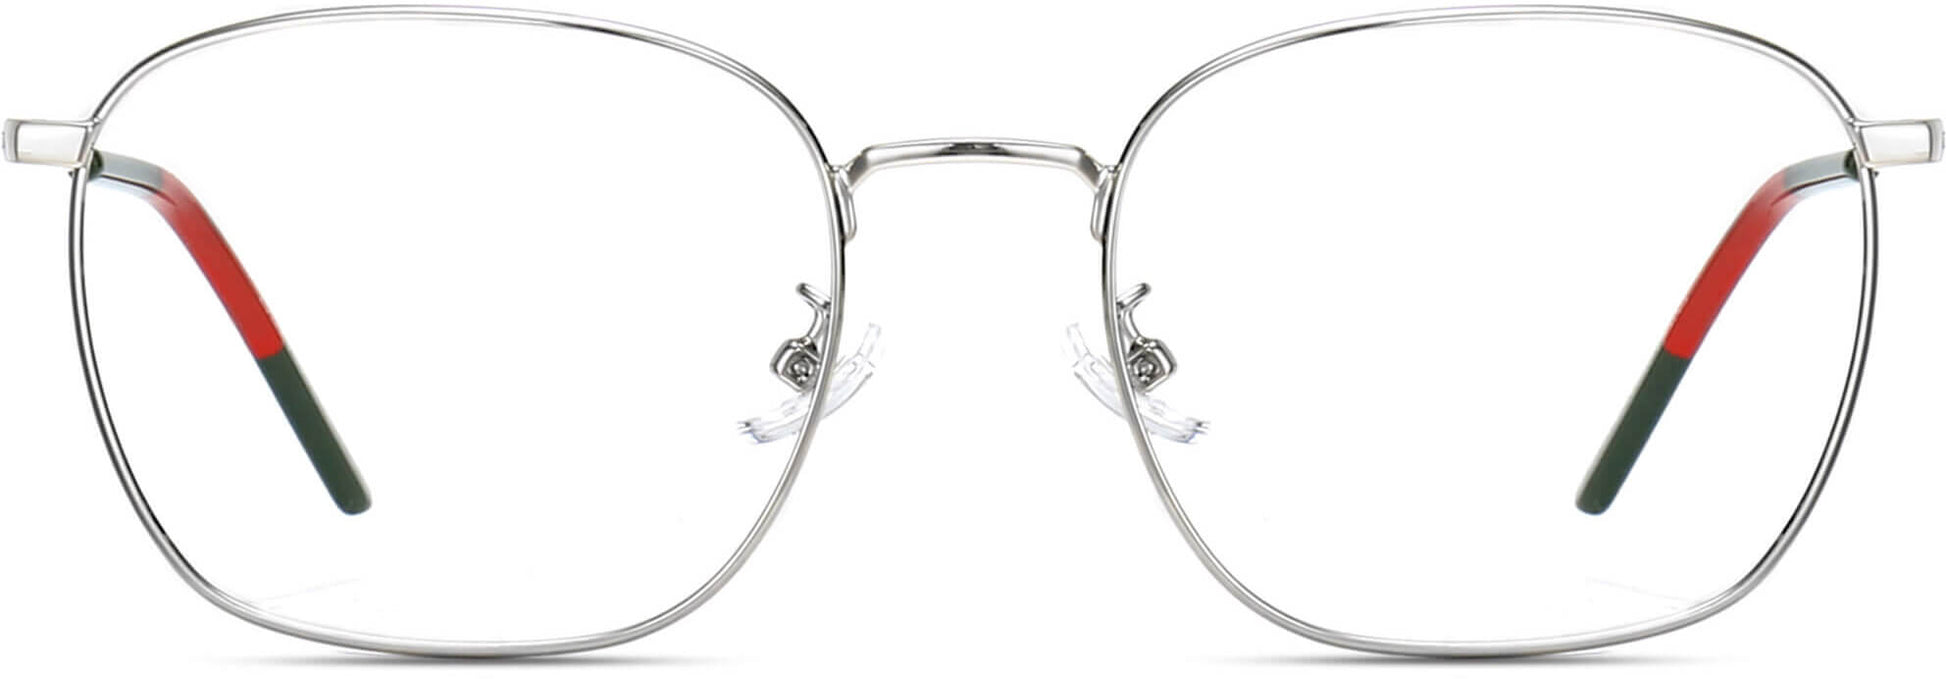 Thiago Square Silver Eyeglasses from ANRRI, front view